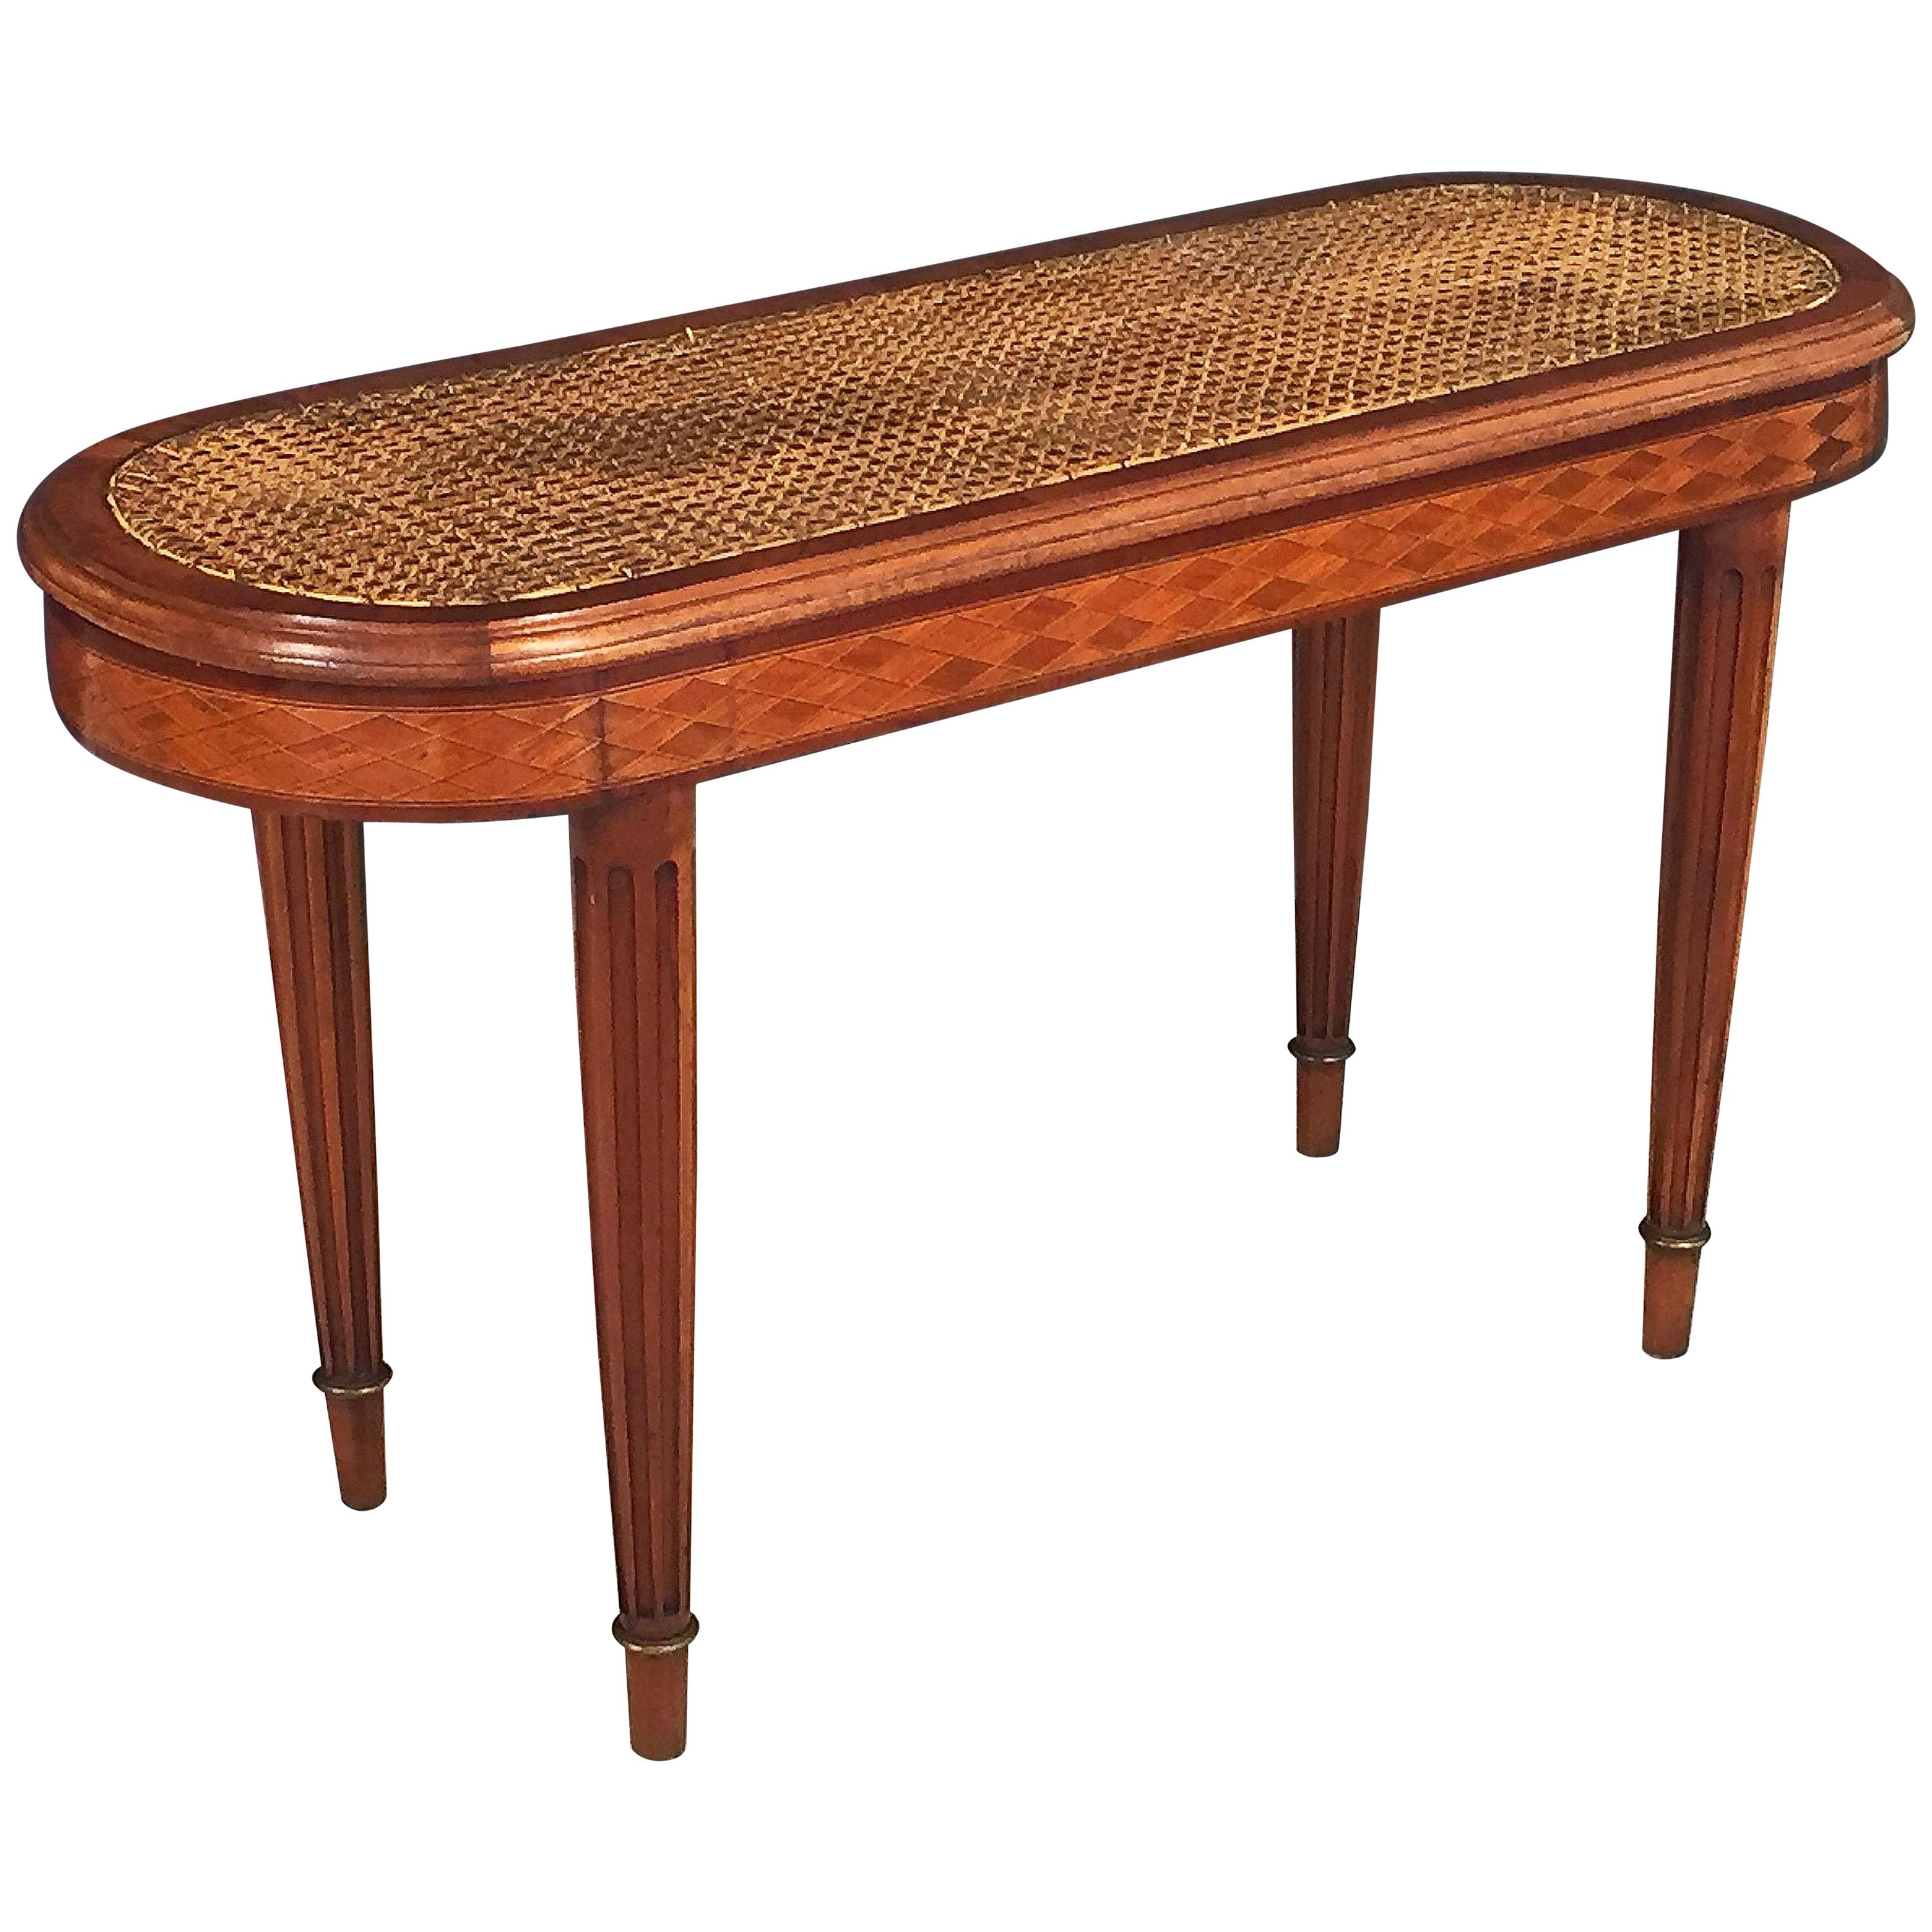 French Caned Oval Bench or Seat of Mahogany